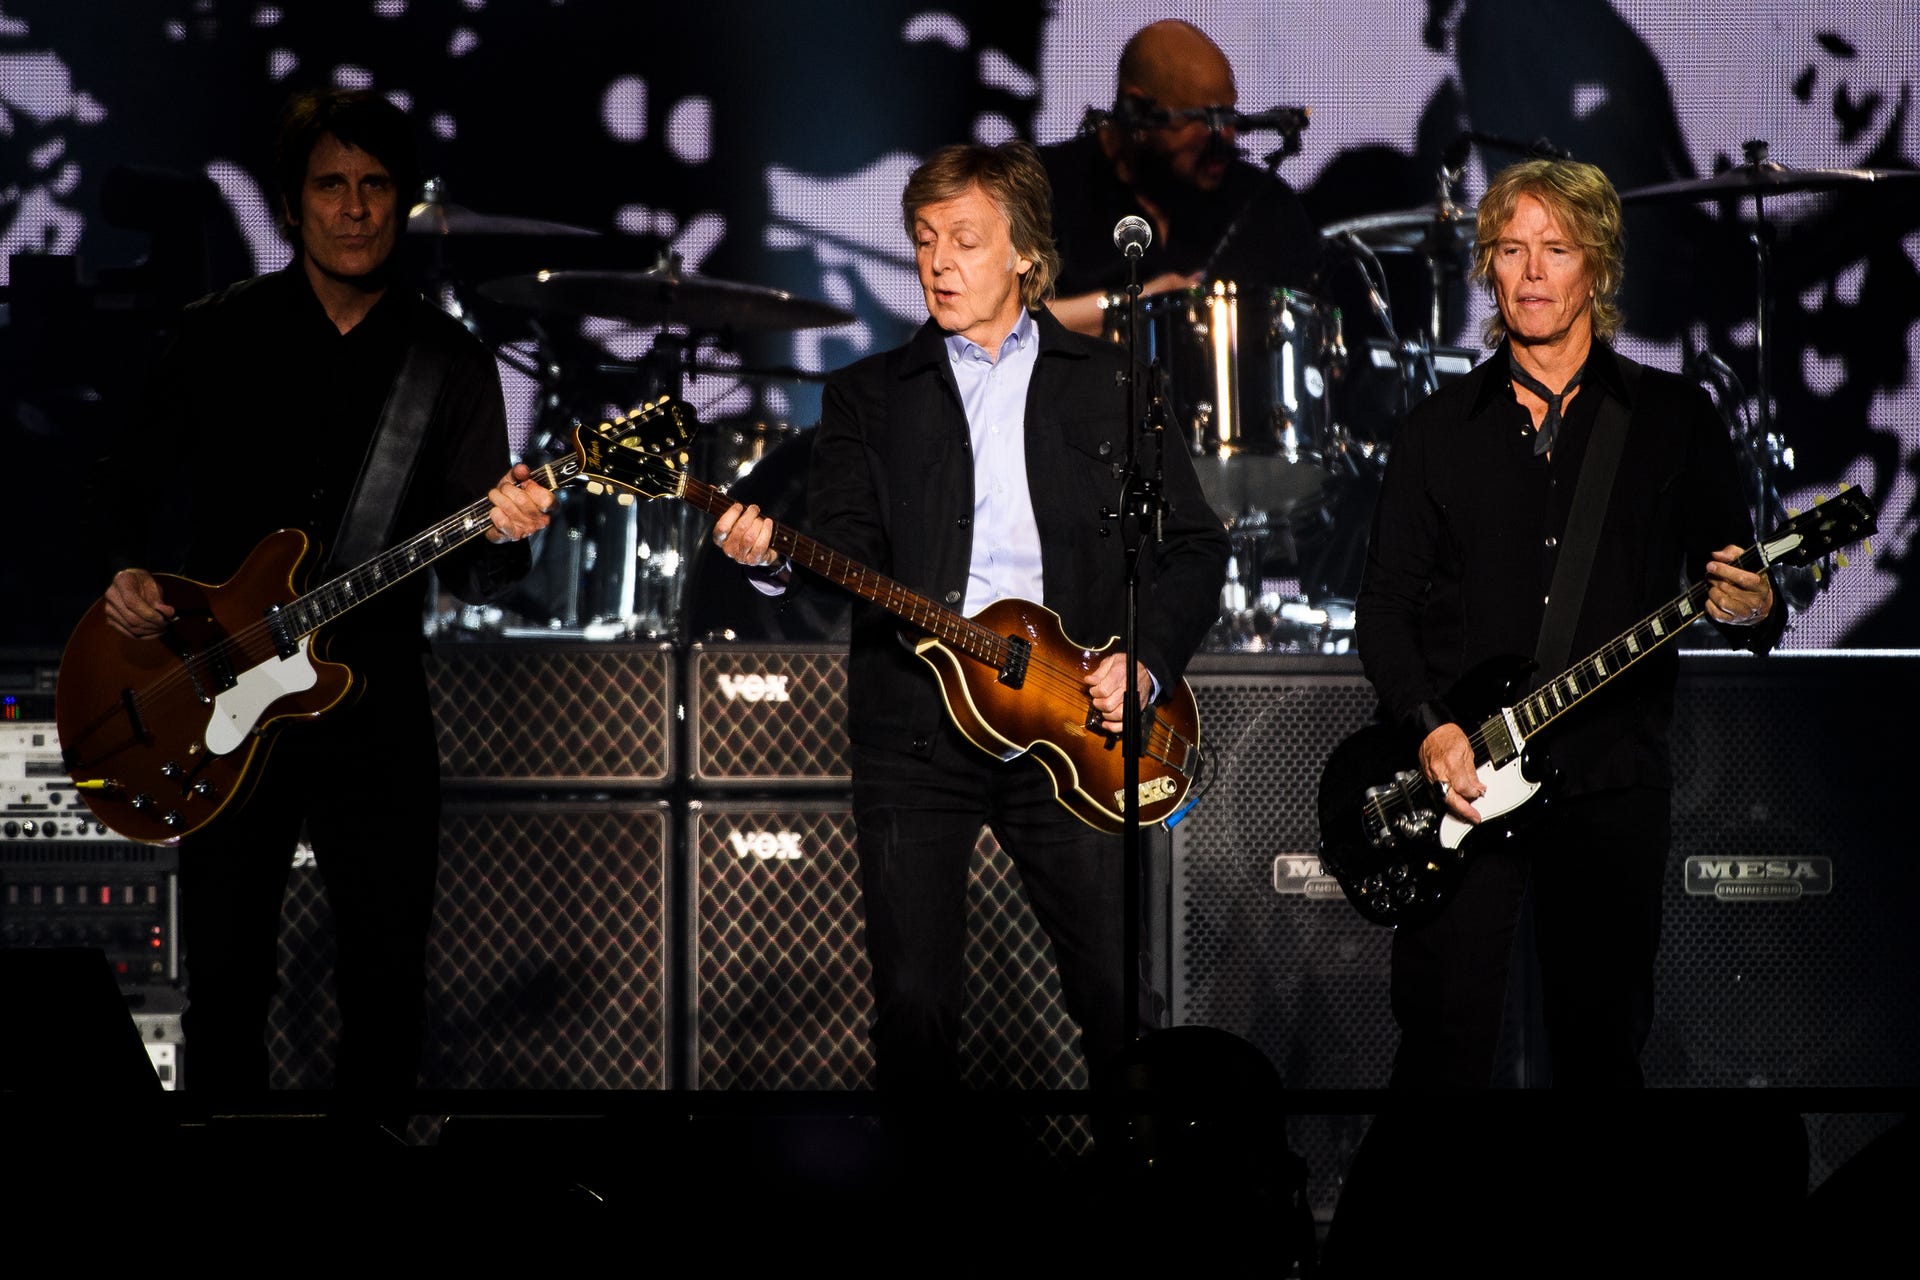 Paul McCartney performs in Greenville on his Freshen Up tour at the Bon Secours Wellness Arena Thursday, May 30, 2019.